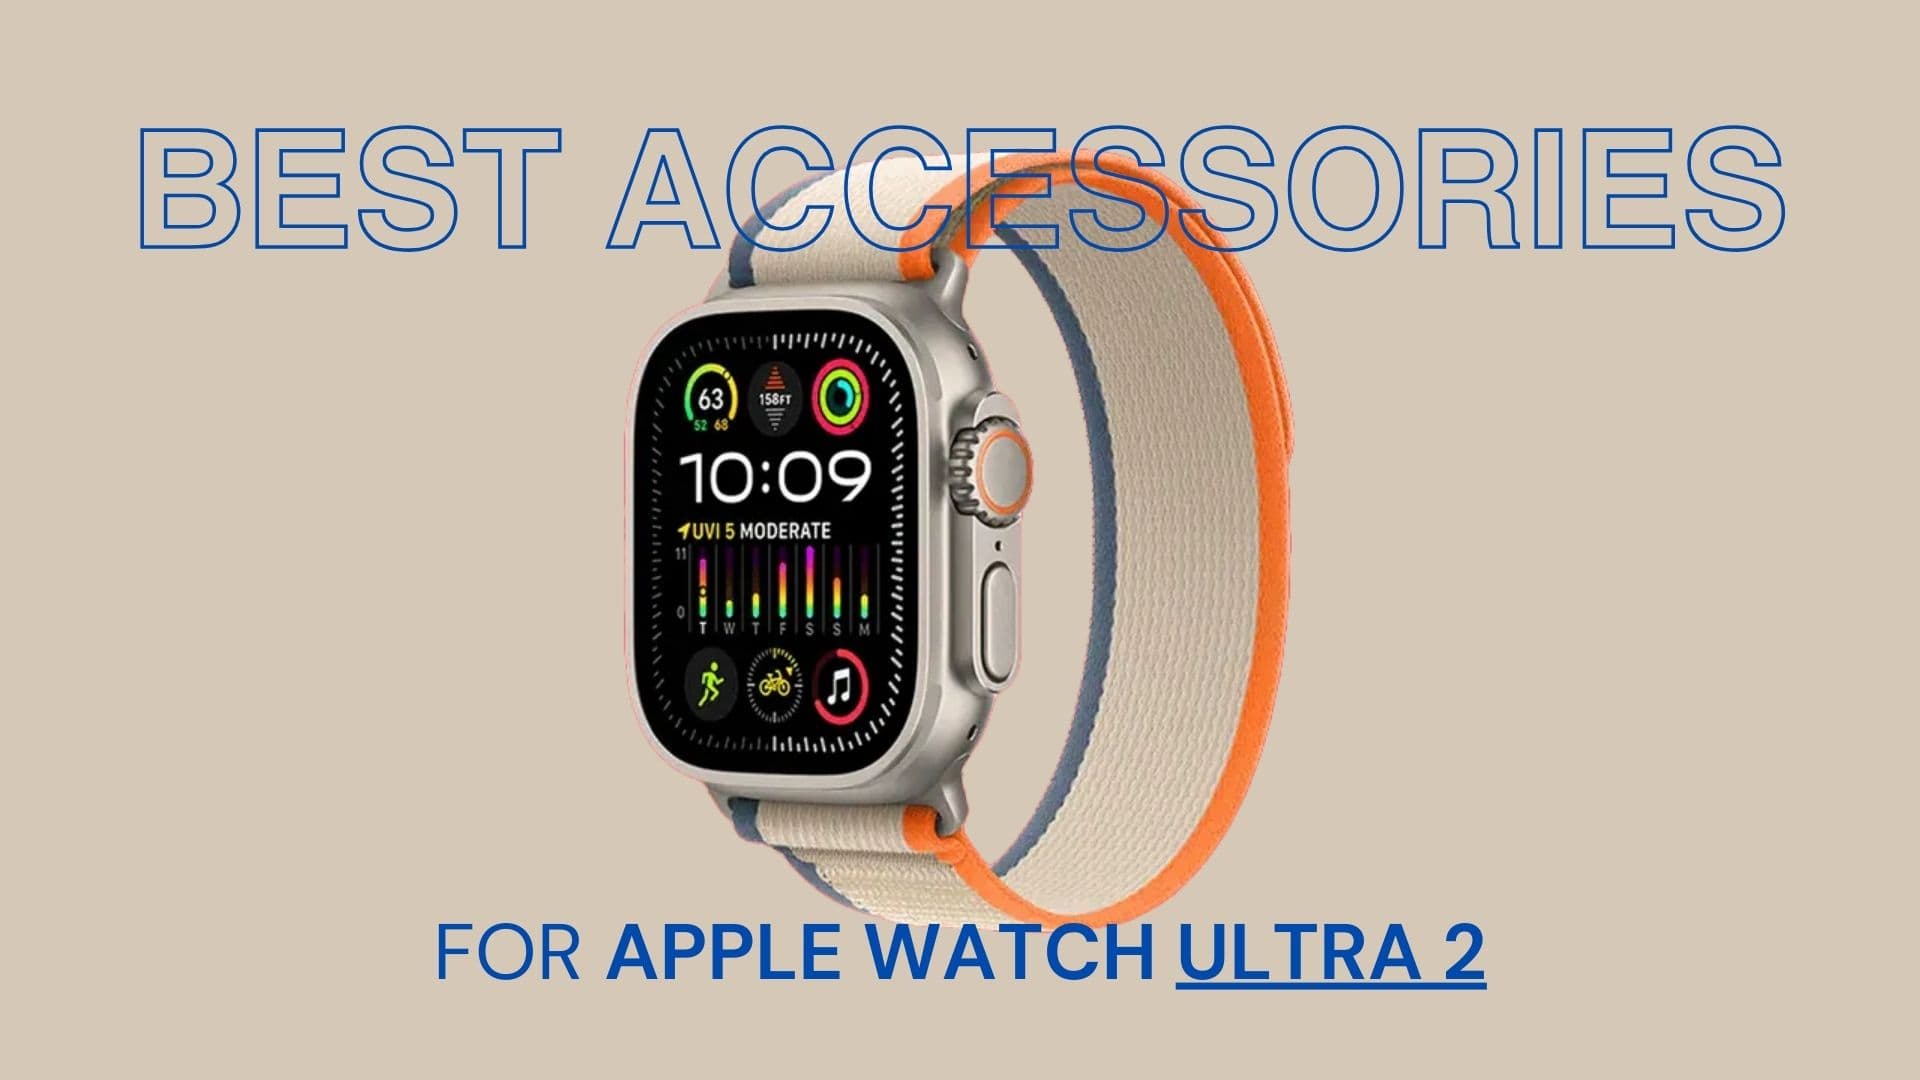 My favorite accessories for the Apple Watch Ultra 2